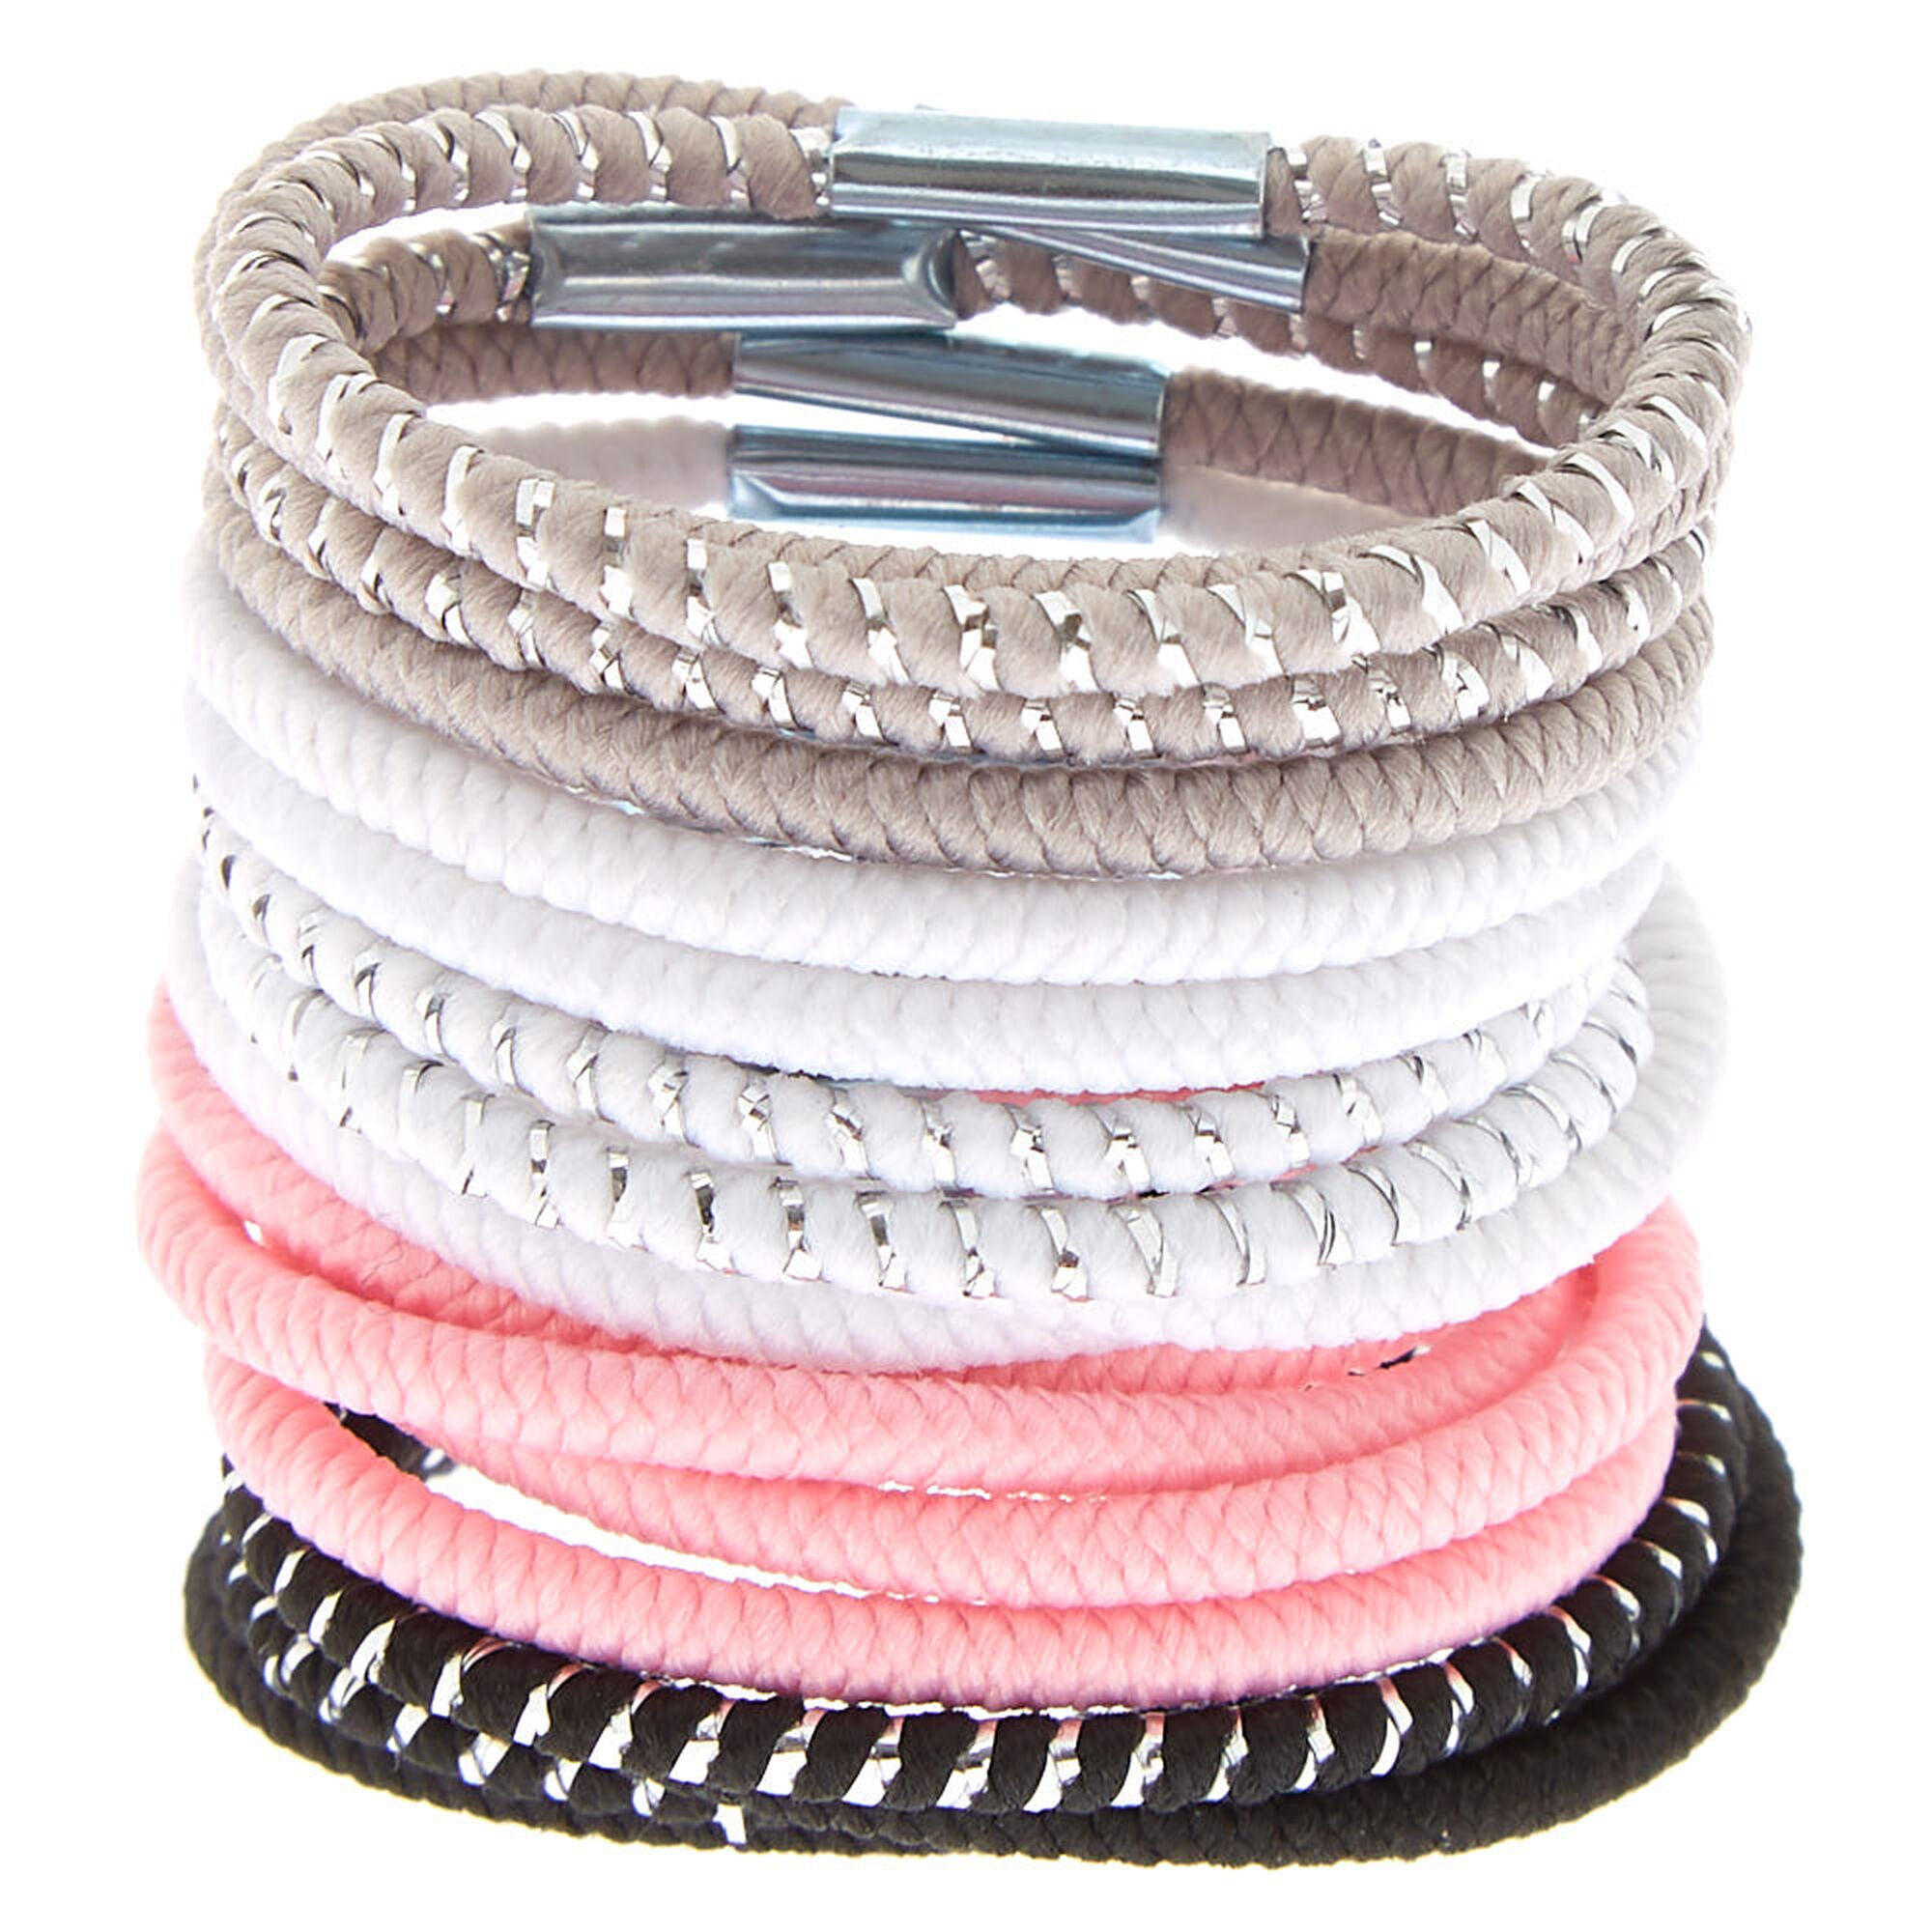 View Claires Club Mini Hair Ties 18 Pack information